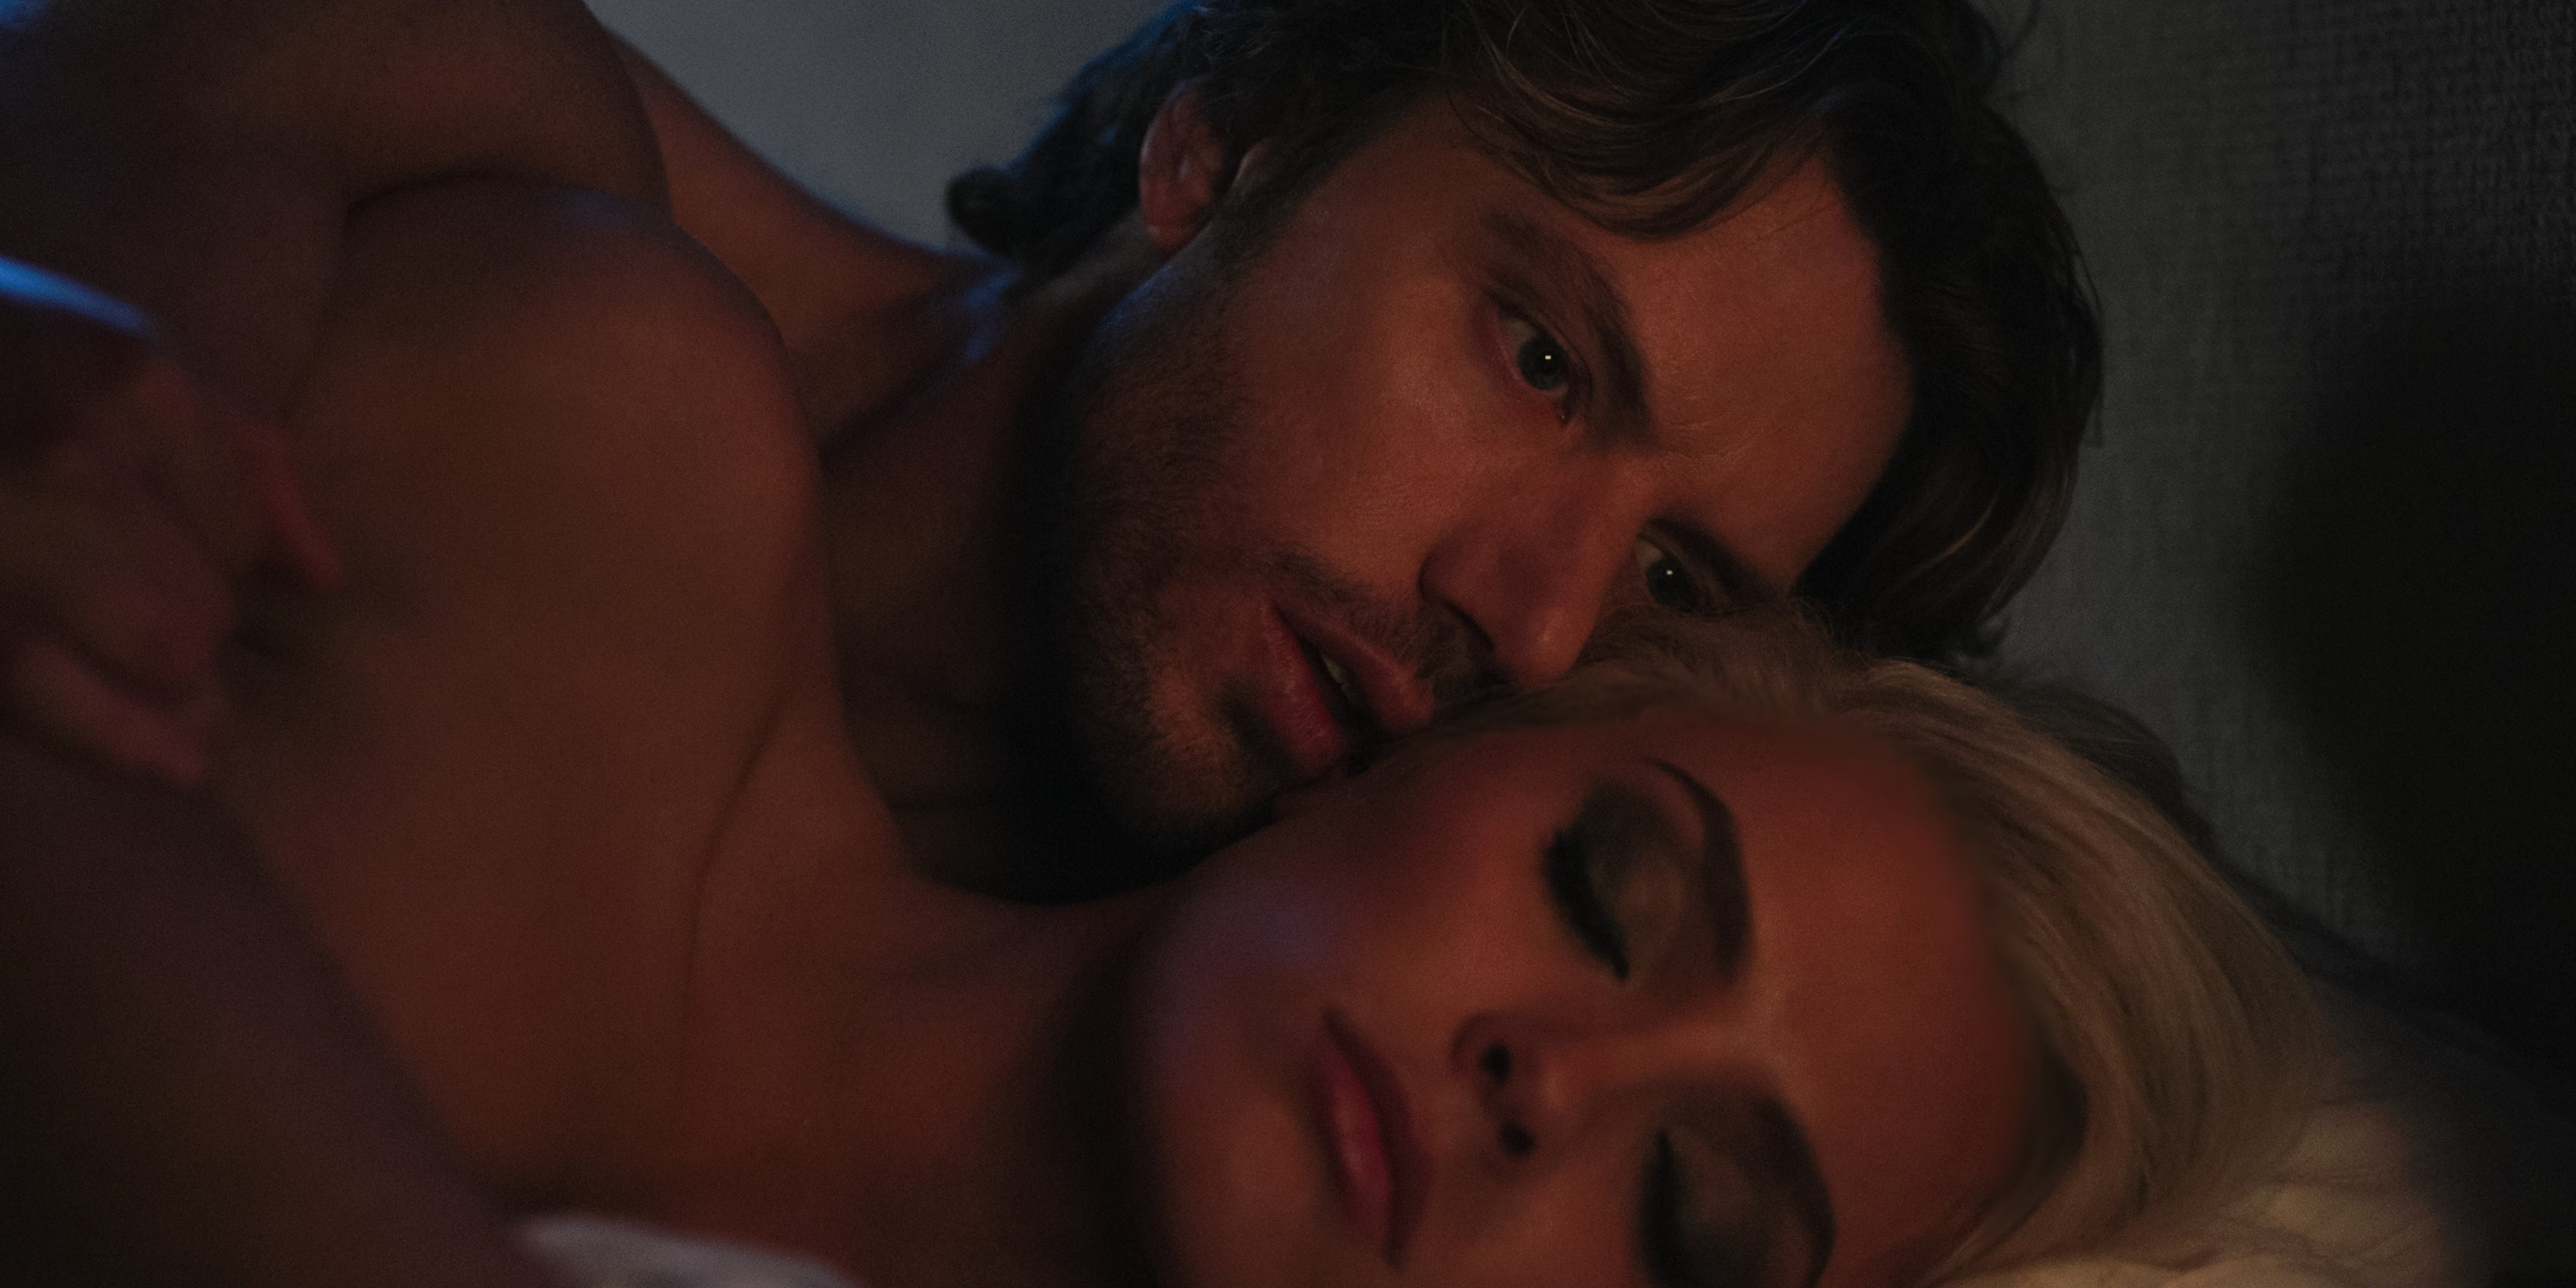 Sex/Life on Netflix Season 2s sex scenes receive a detailed assessment. image pic